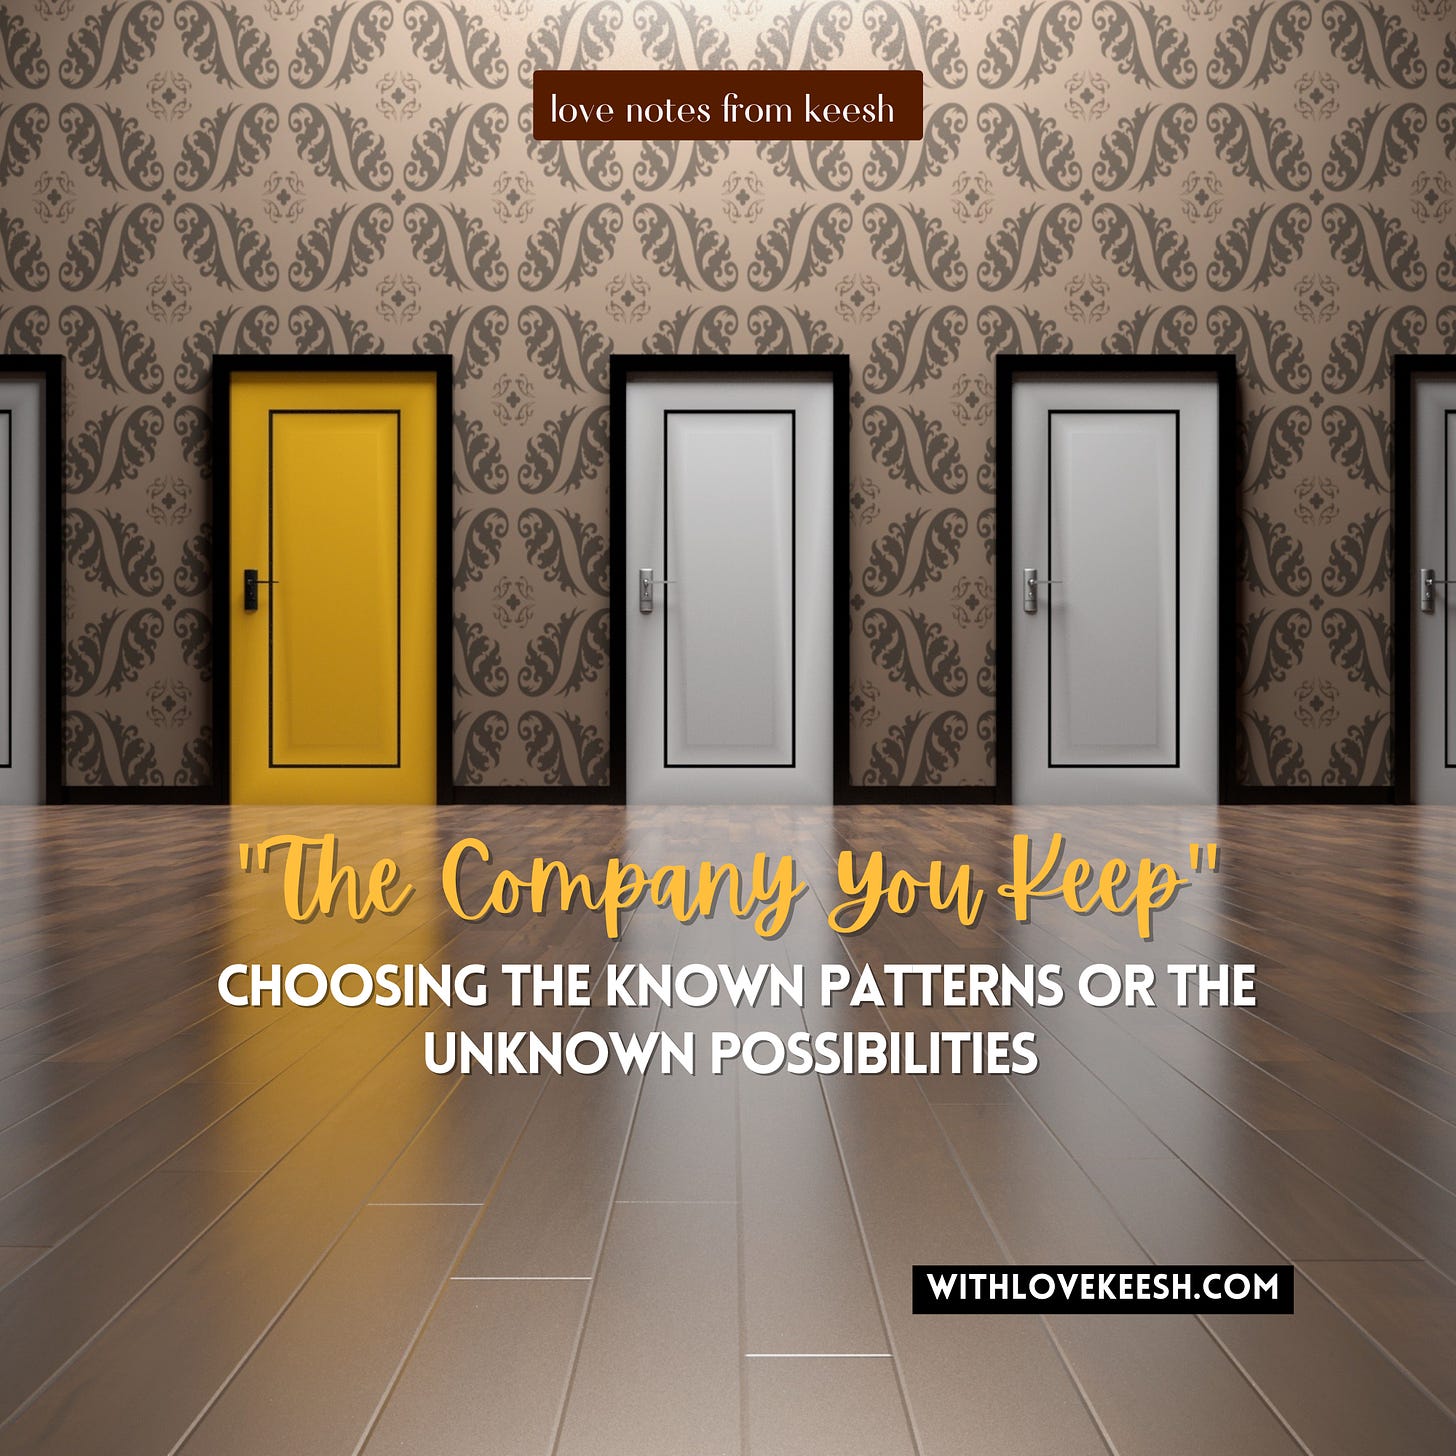 "The Company You Keep" Choosing the known patterns or the unknown possibilities